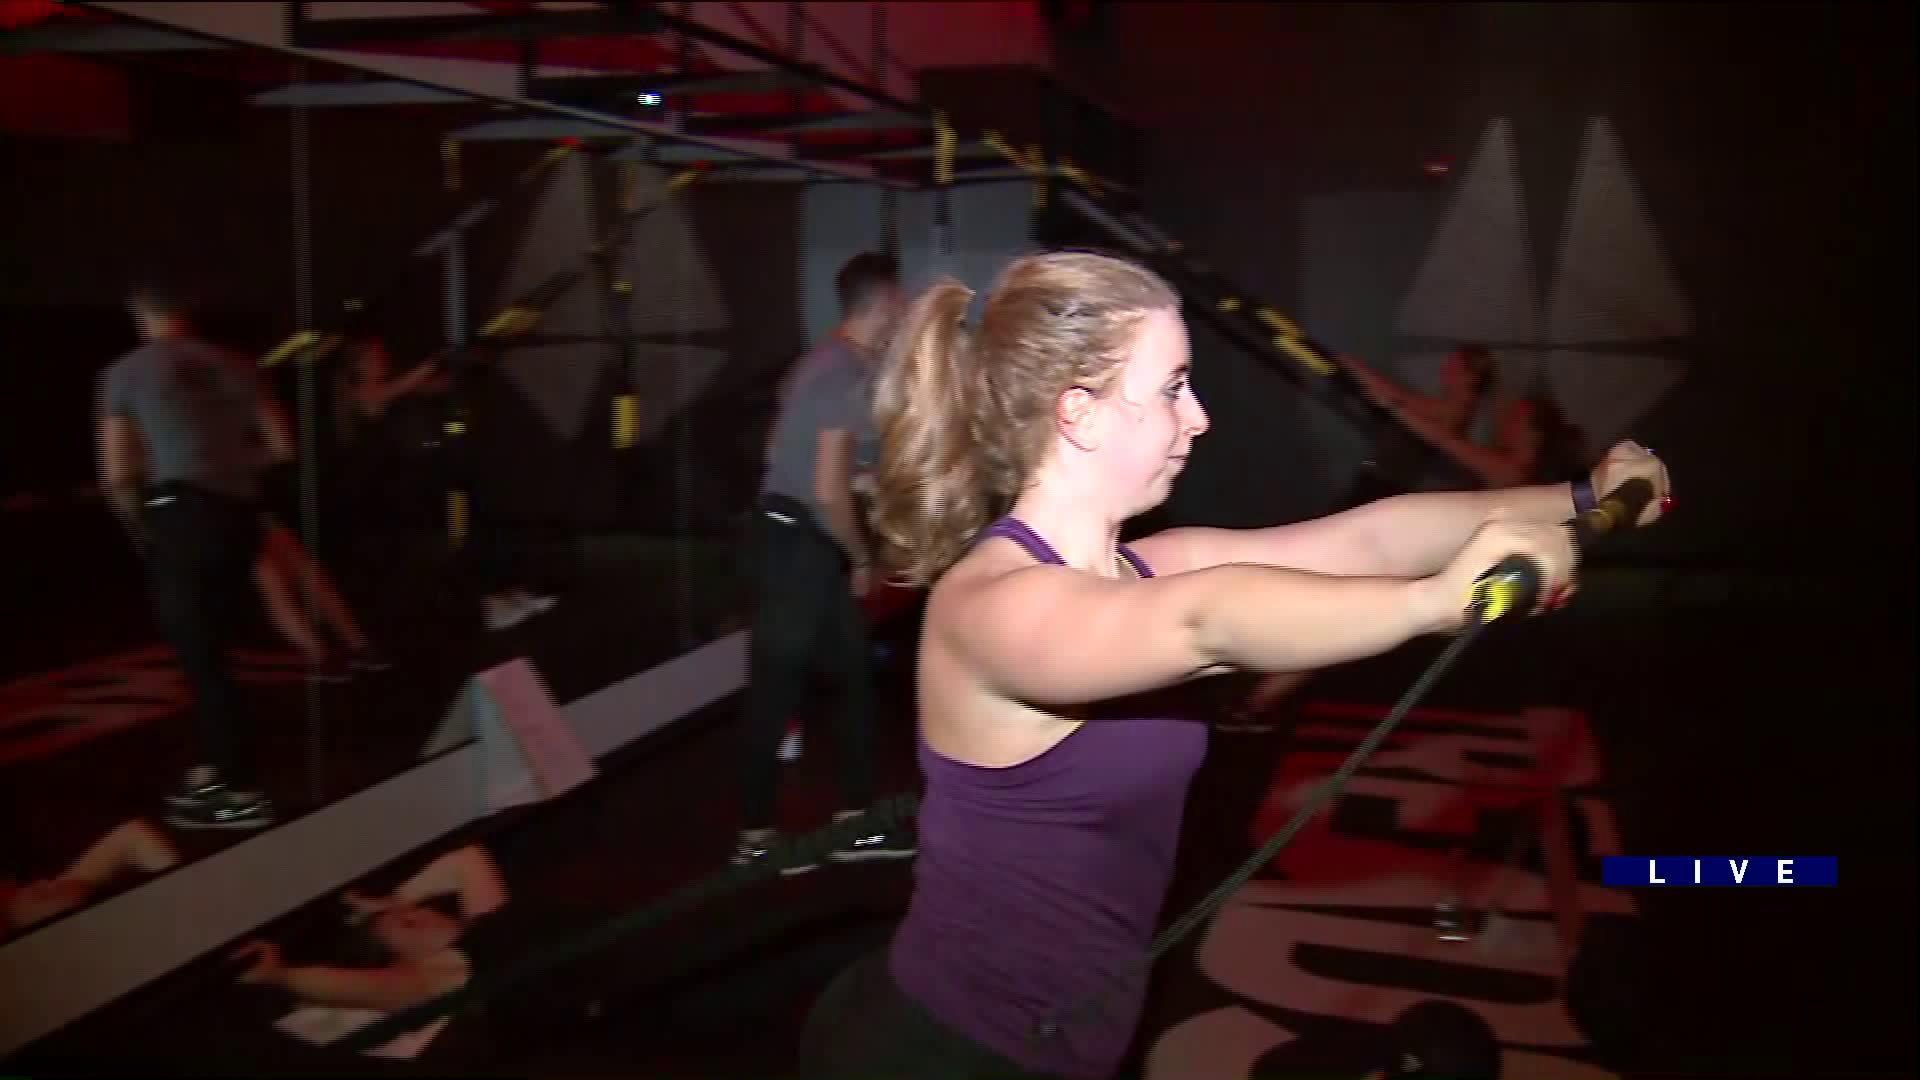 Around Town checks out Runaway Fitness